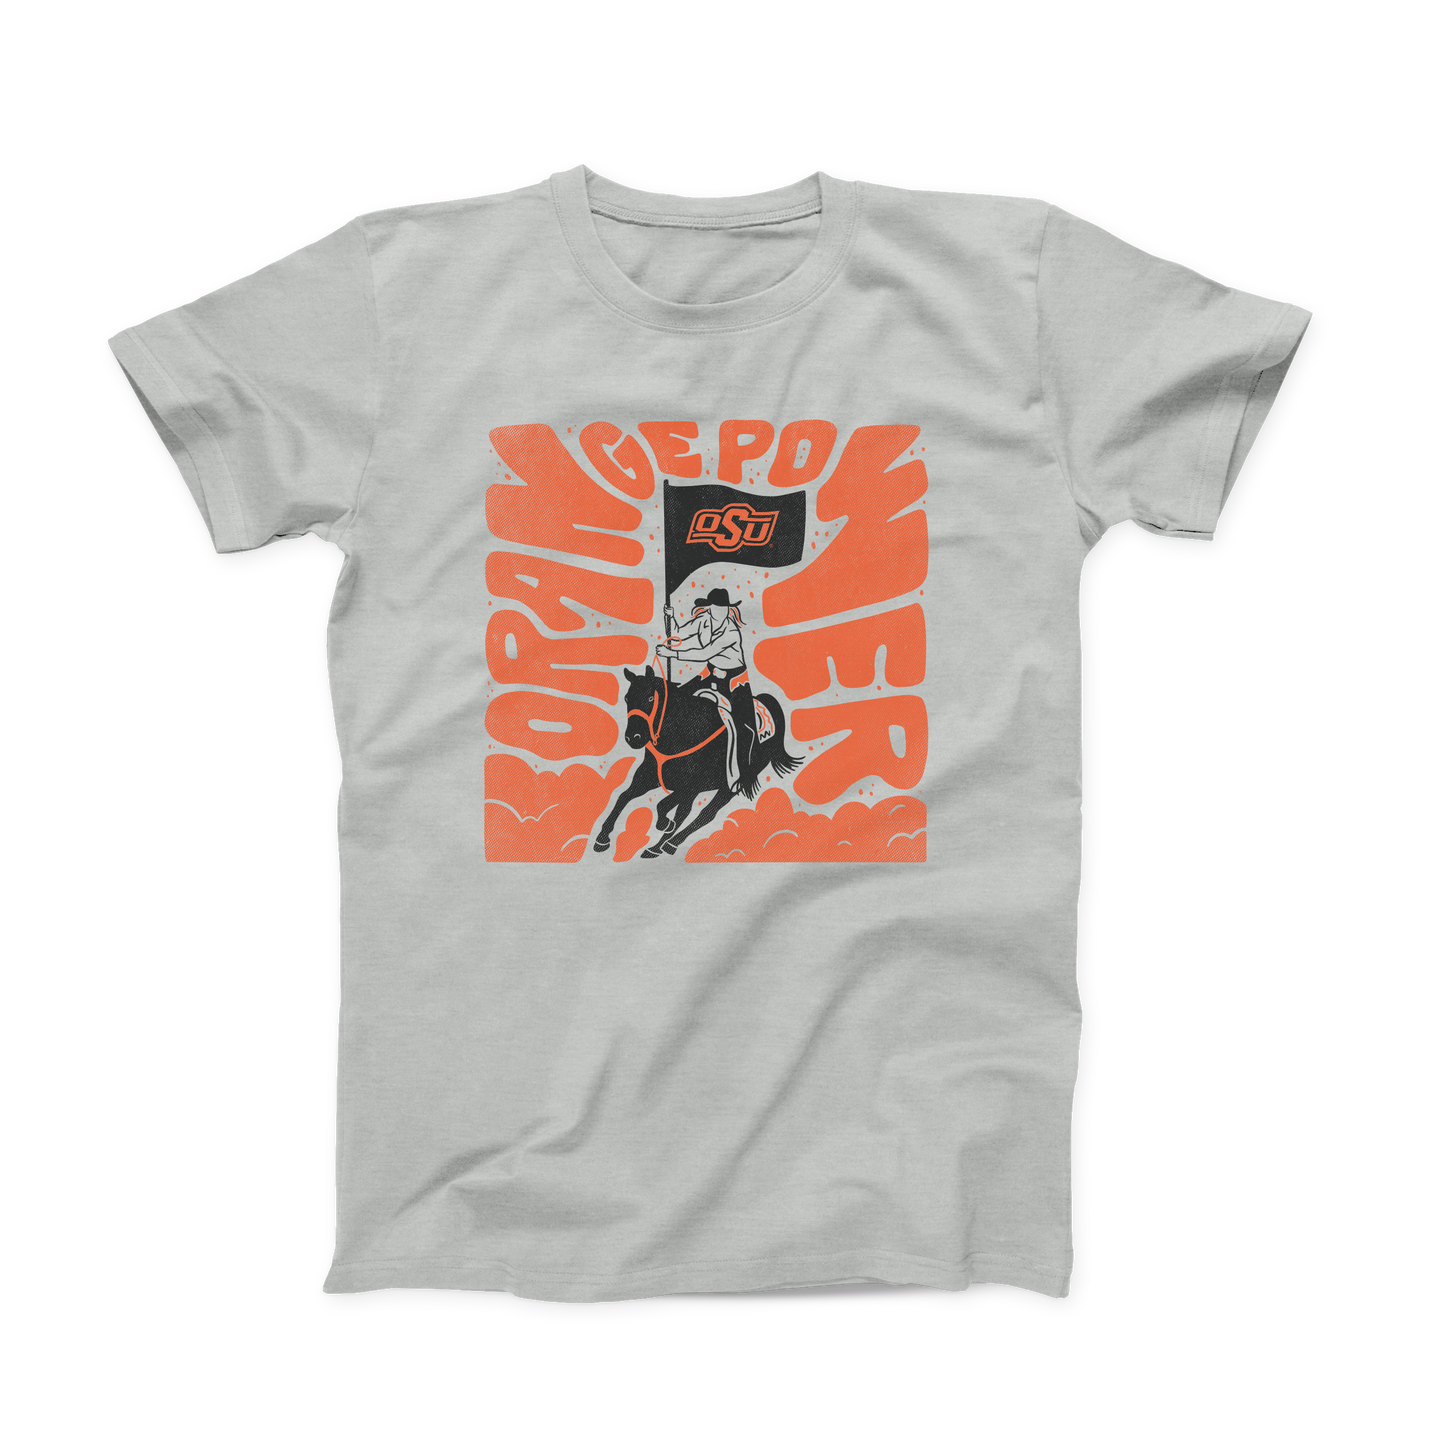 Silver Grey OSU T-shirt. Square design in orange and black of a Cowboy on horseback holding an OSU flag. Large, orange font "Orange Power" fit into the edges of the design and wrapped around the center figure. Orange colored dust clouds at the bottom to complete the square.